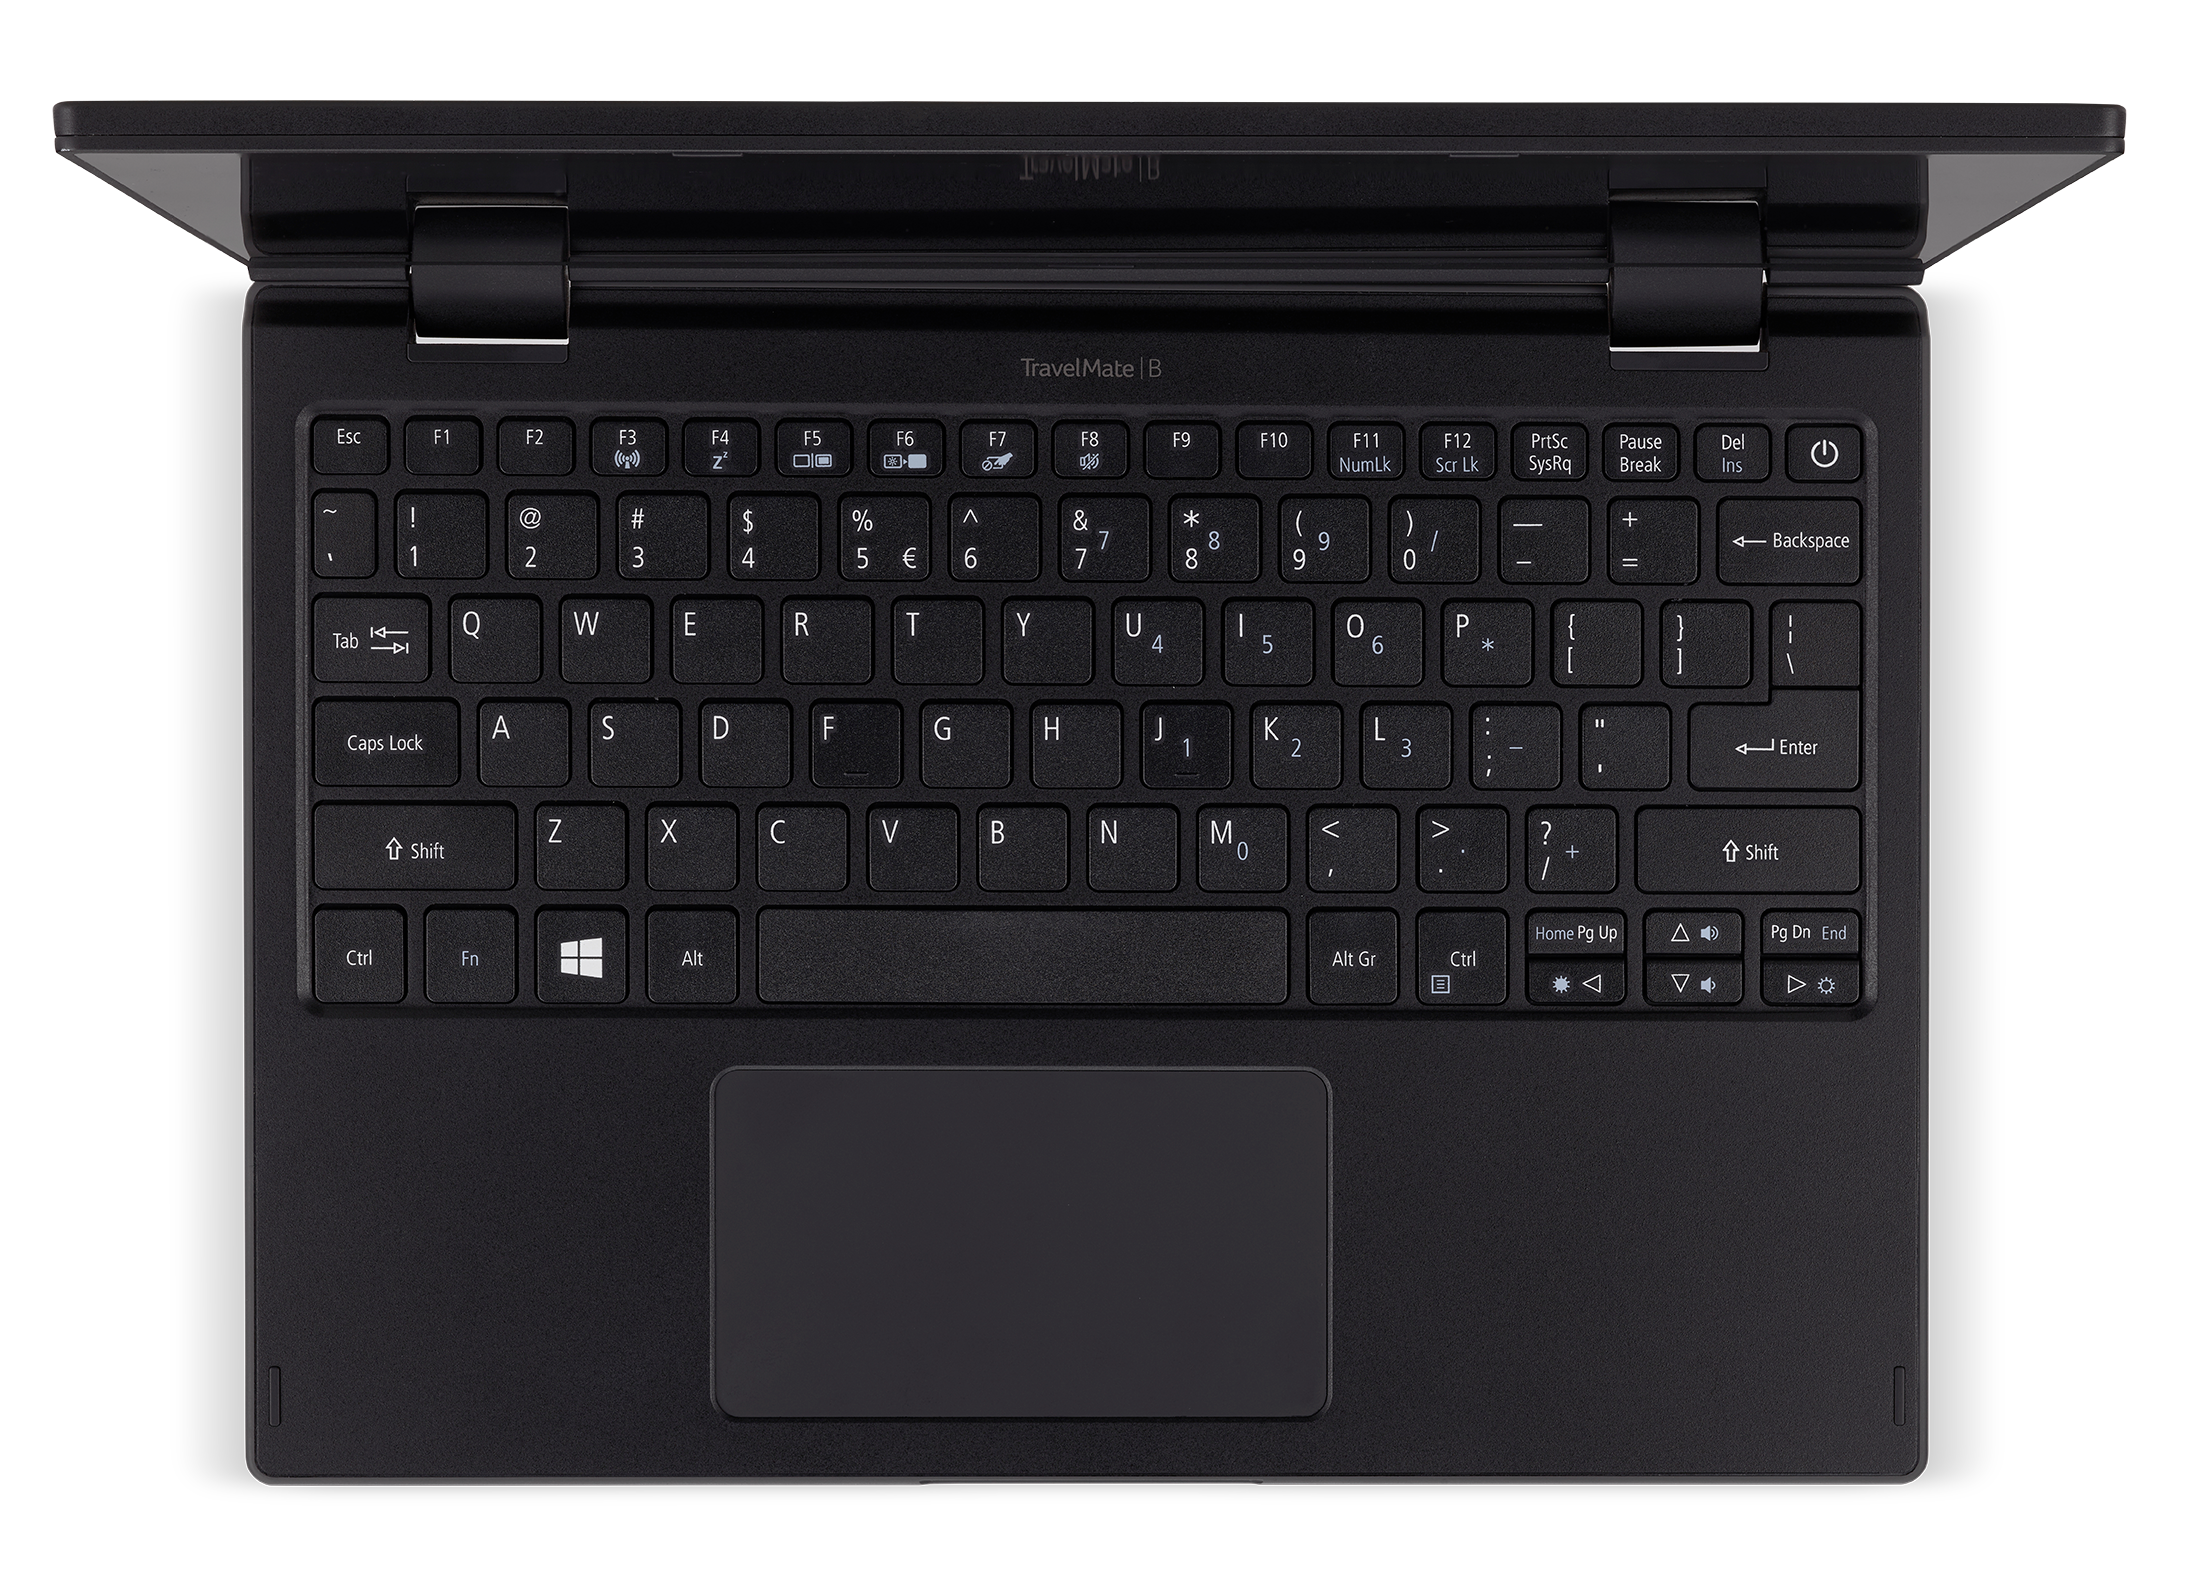 Acer TravelMate Spin B118